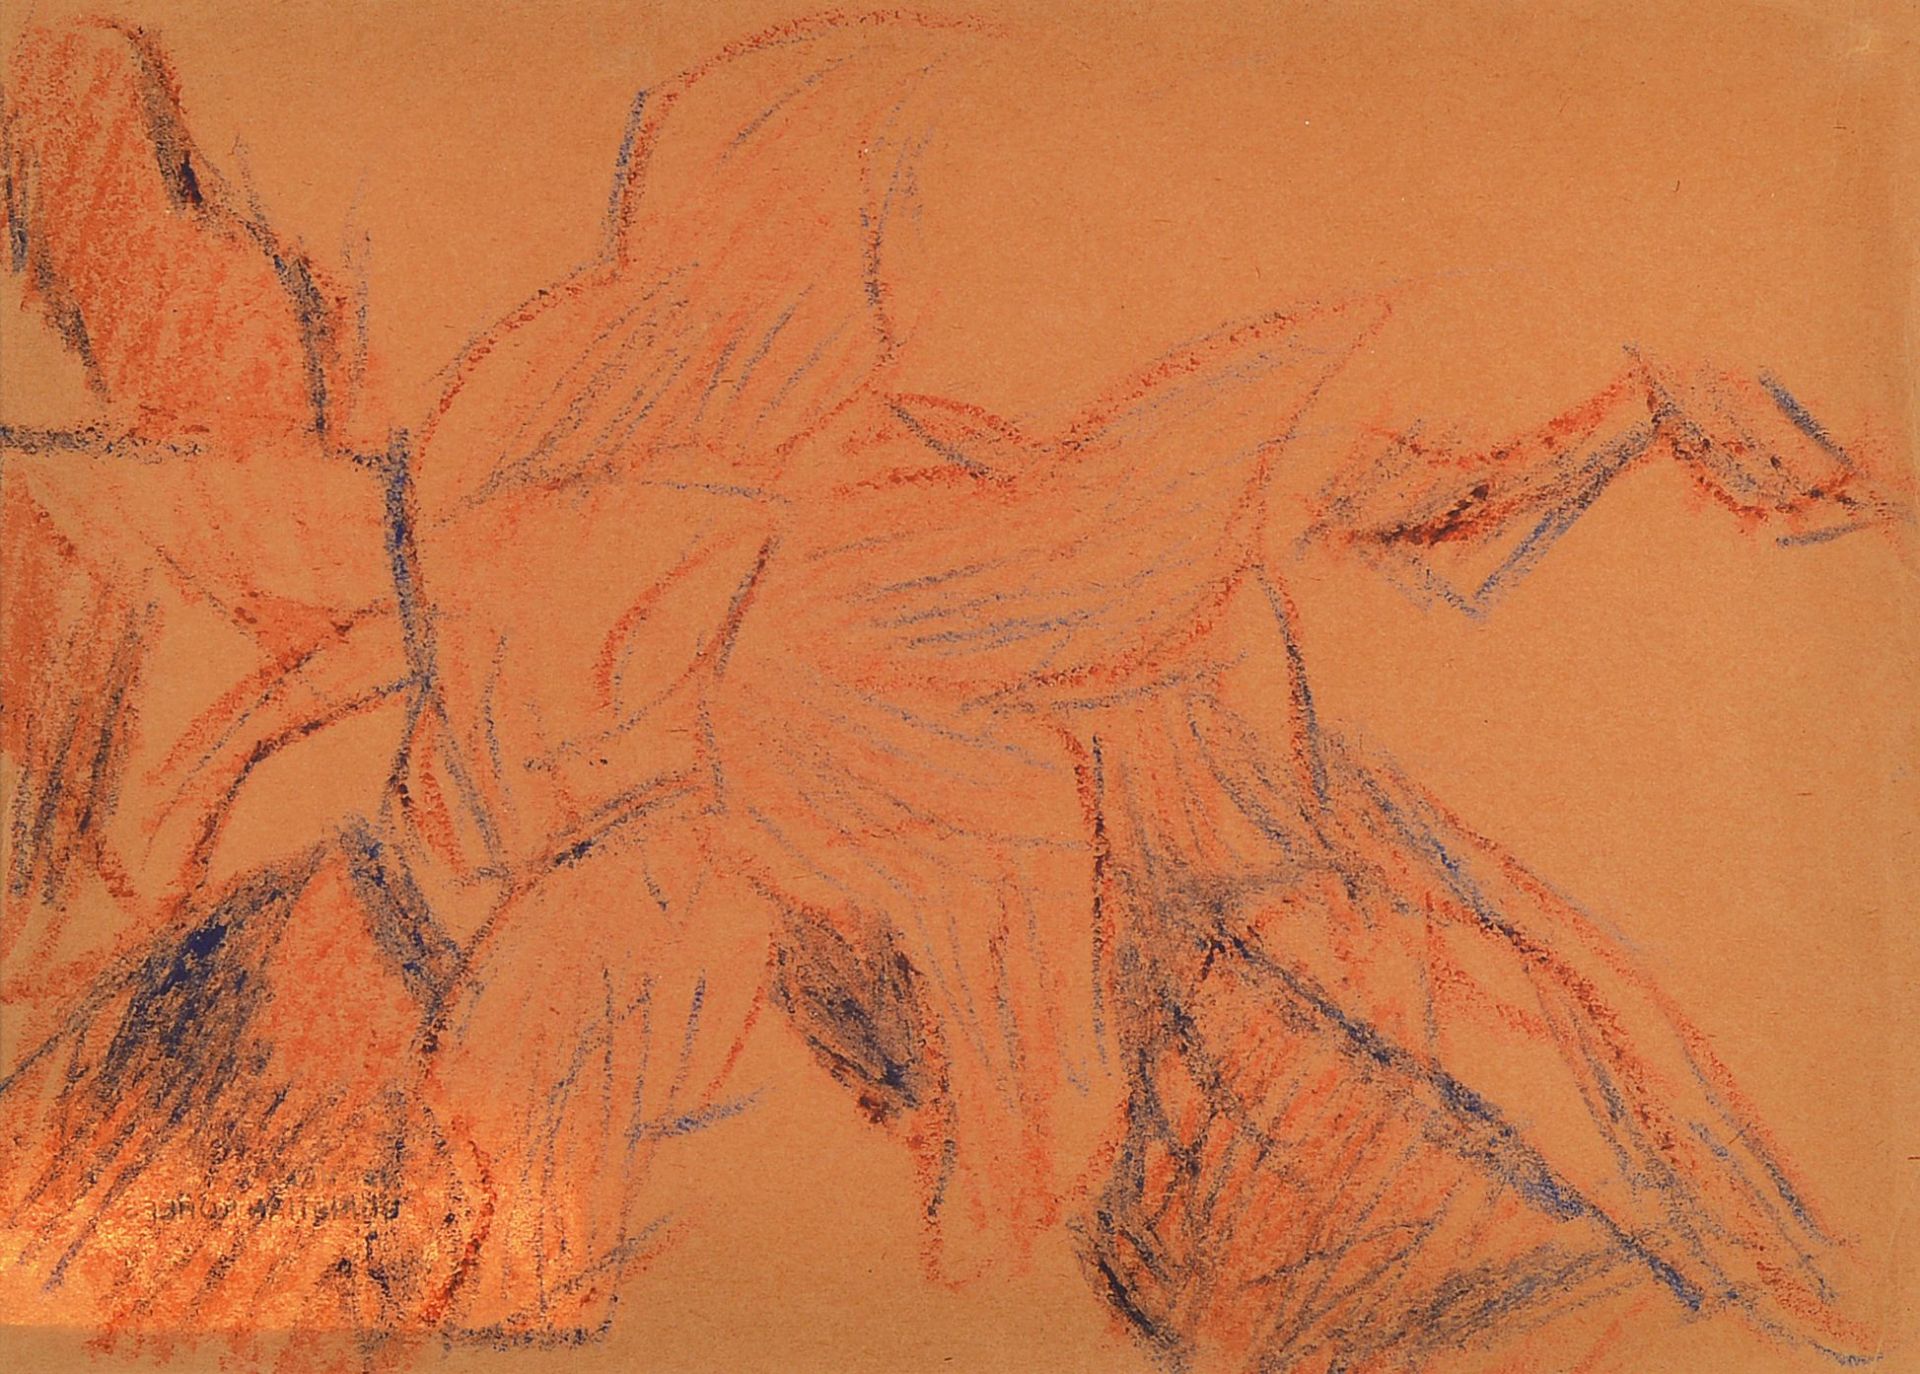 Christian Rohlfs, 1849 - 1938, crayon on brownish paper, sheet size 25 x 35 cm, on the reverse on